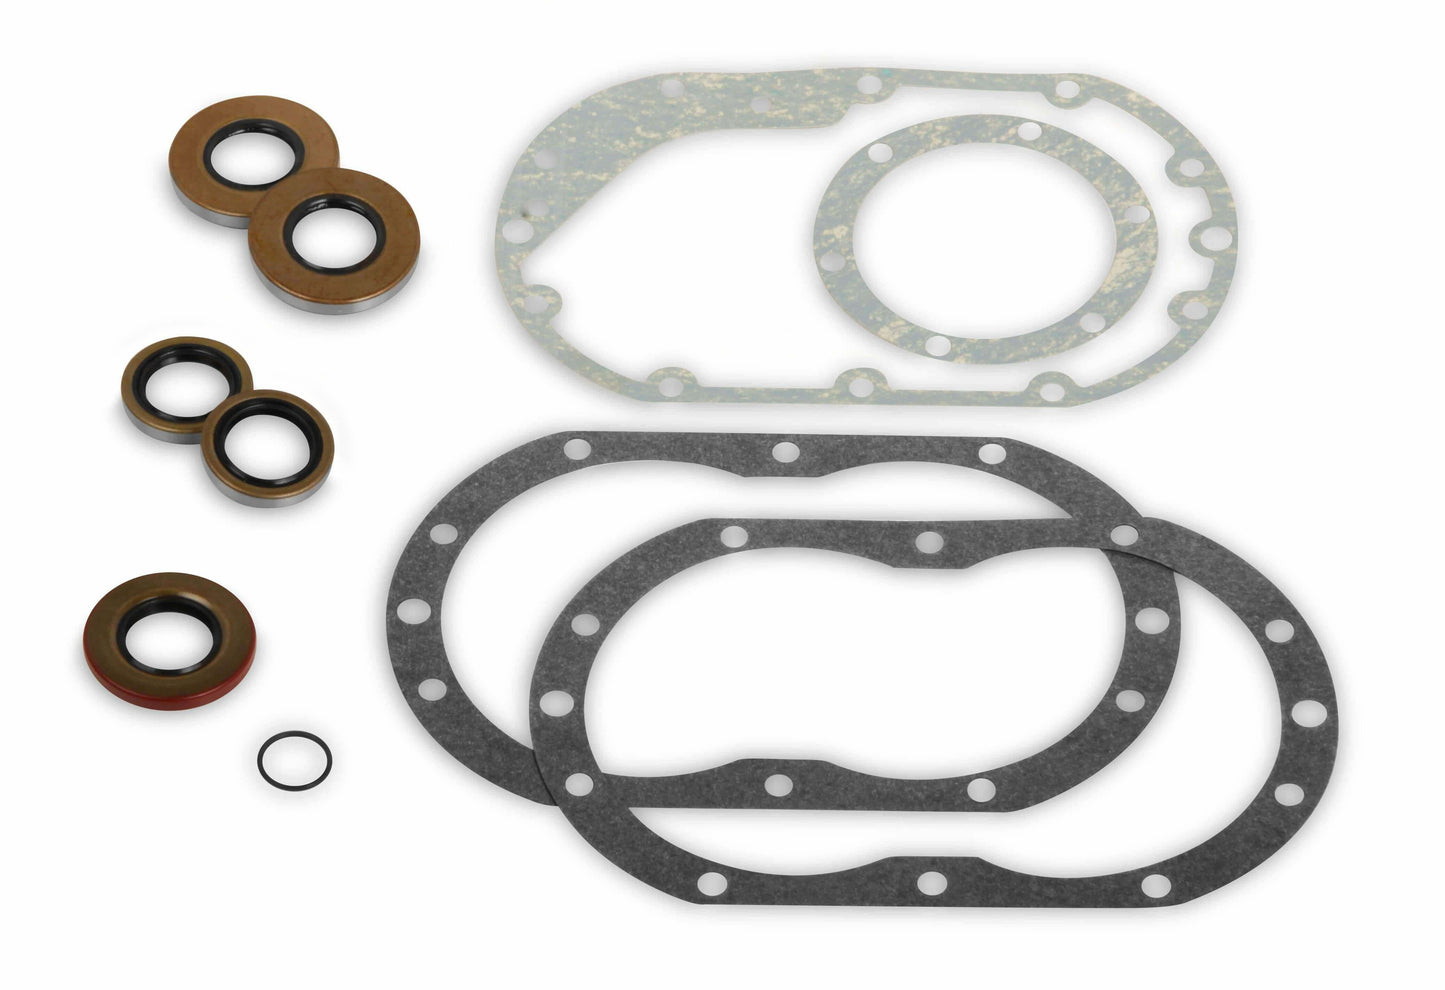 WEIAND SUPERCHARGER SEAL & GASKET KIT - 9593